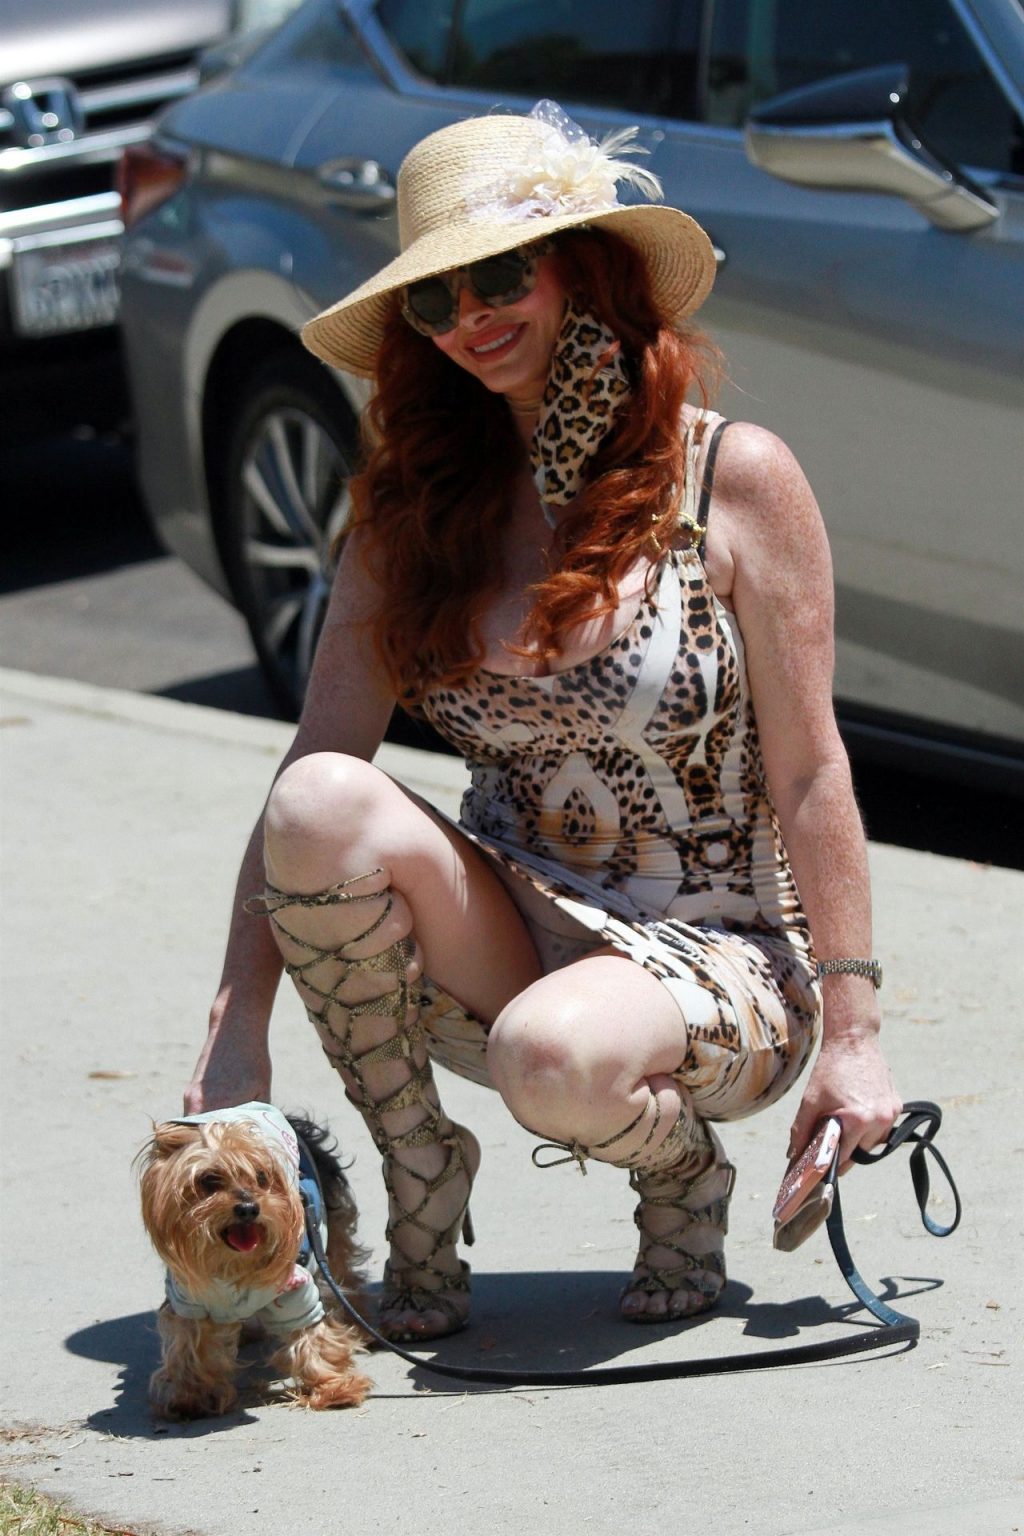 Phoebe Price Takes Her Pooch for a Walk in a Park (36 Photos)